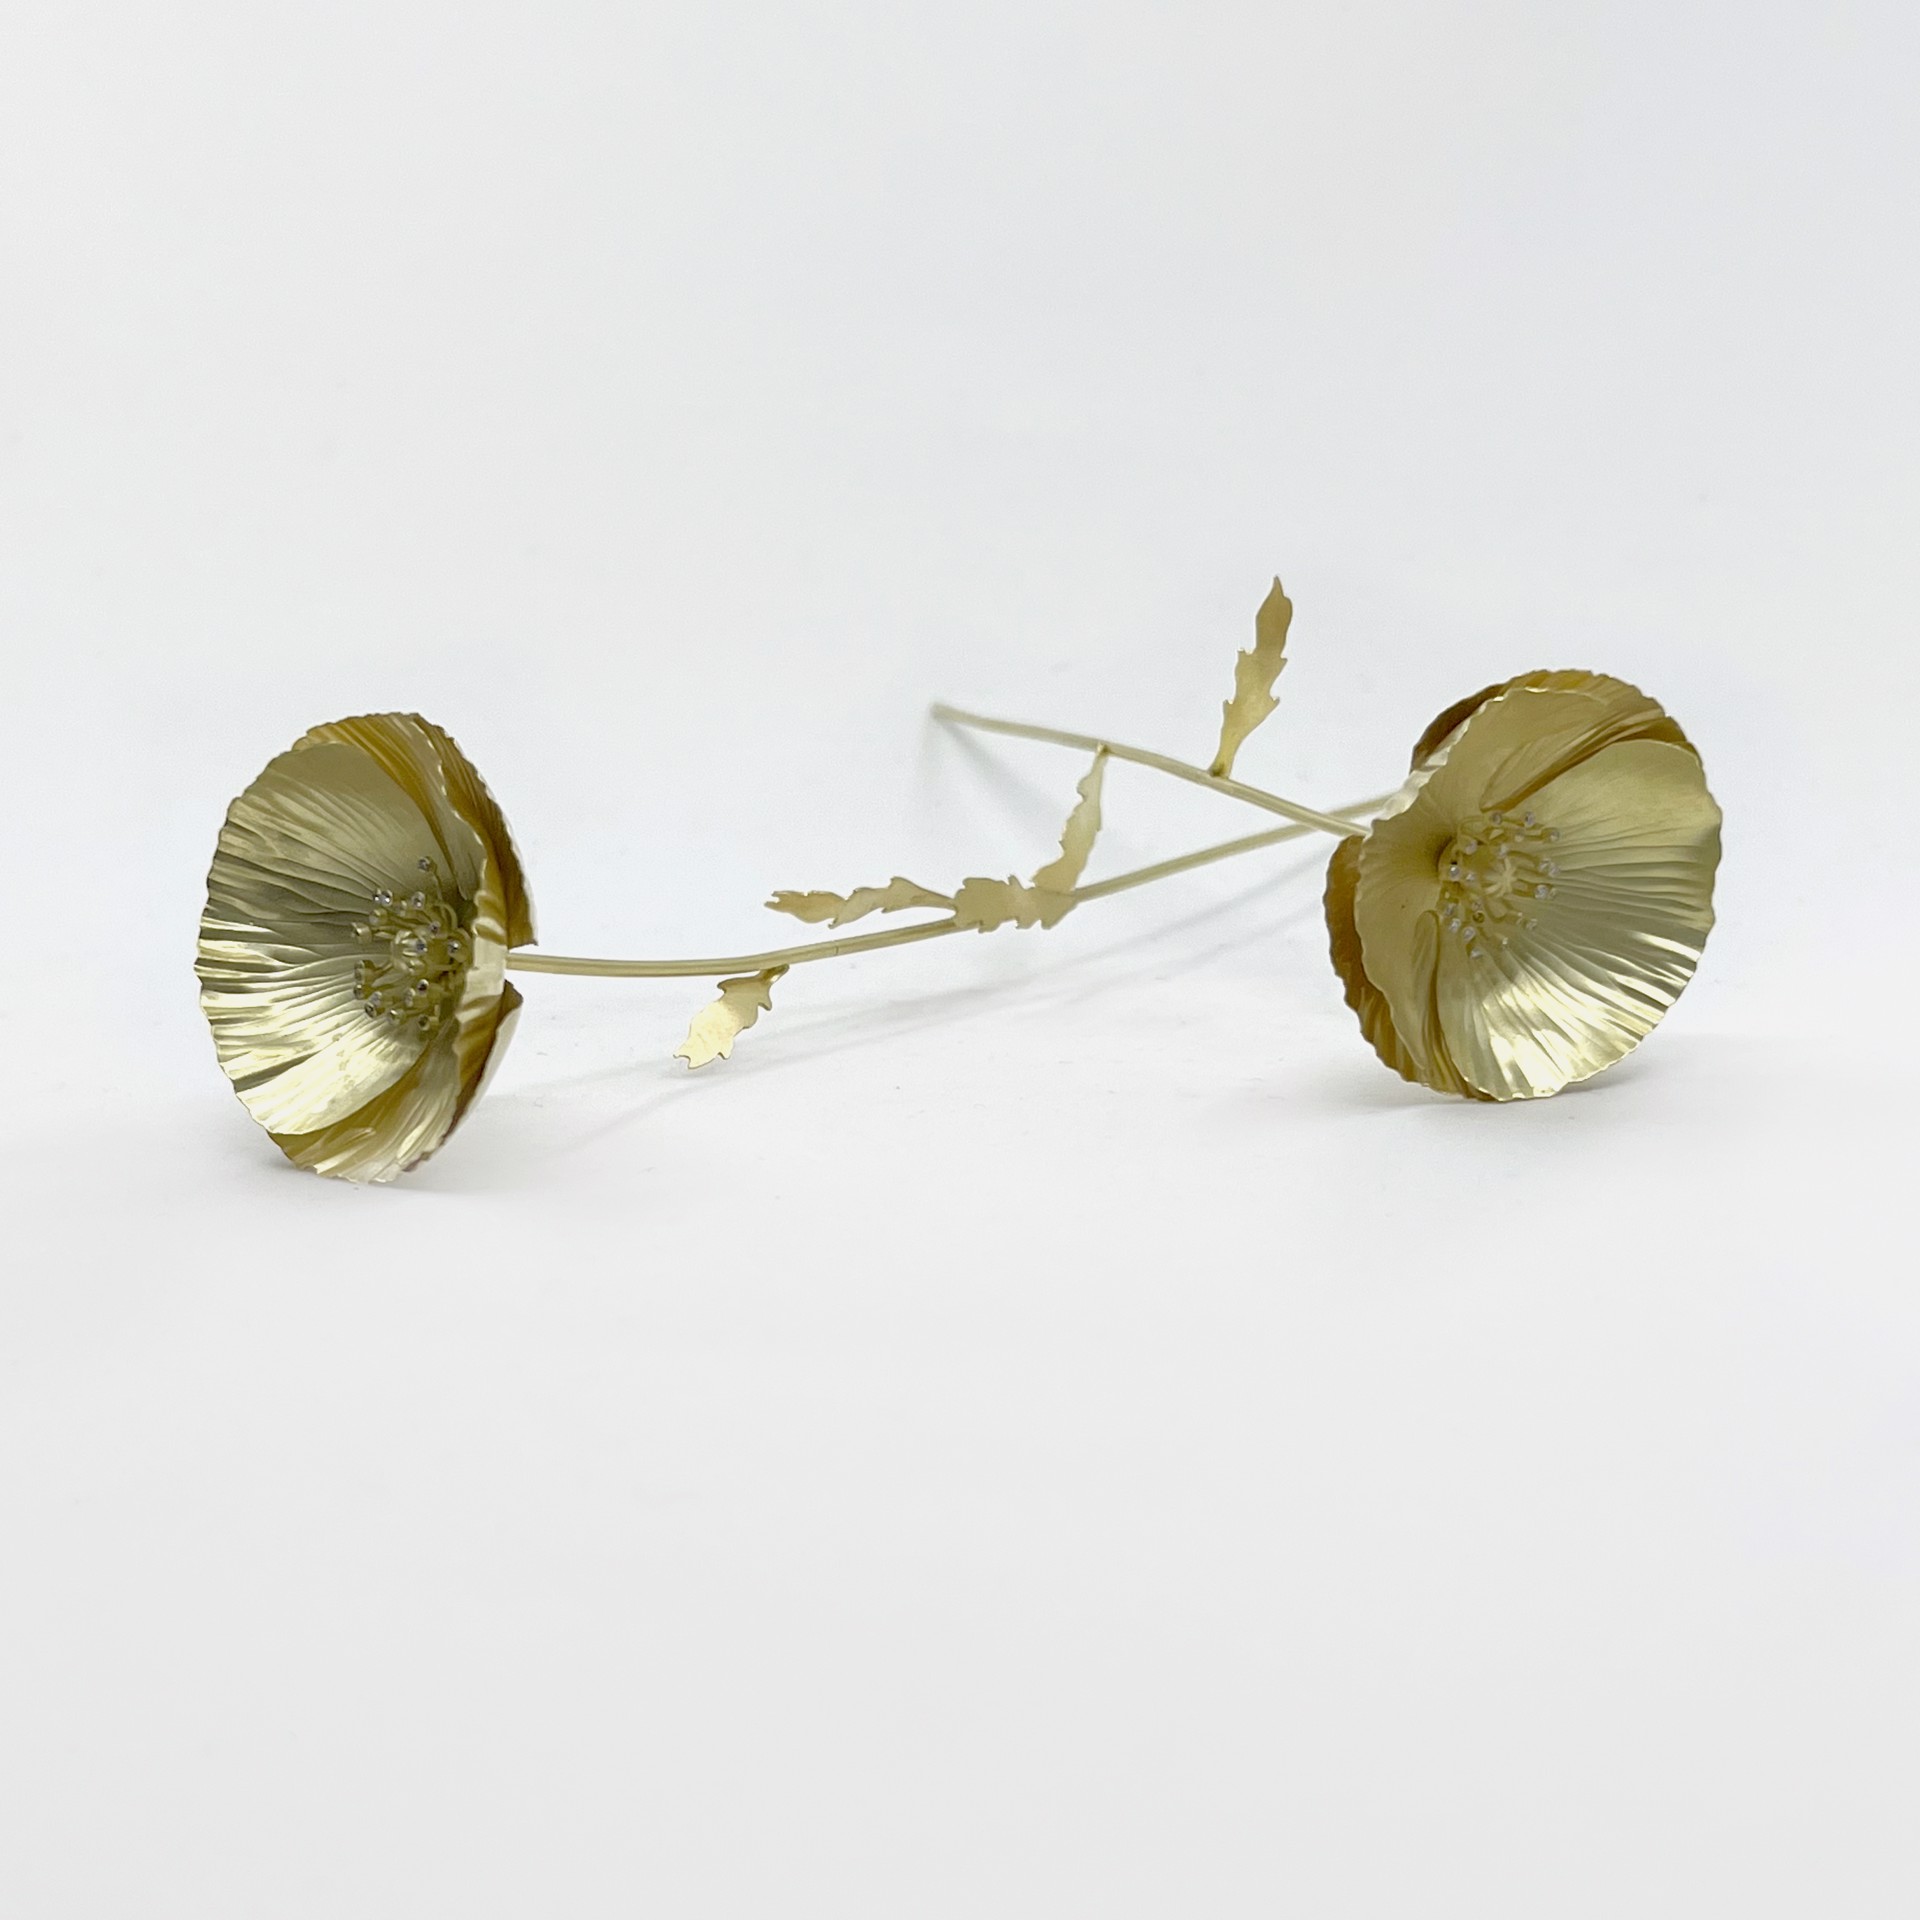 Poppy: Sculpture (Stud Earrings/Jabot Pin) by Christopher Thompson Royds